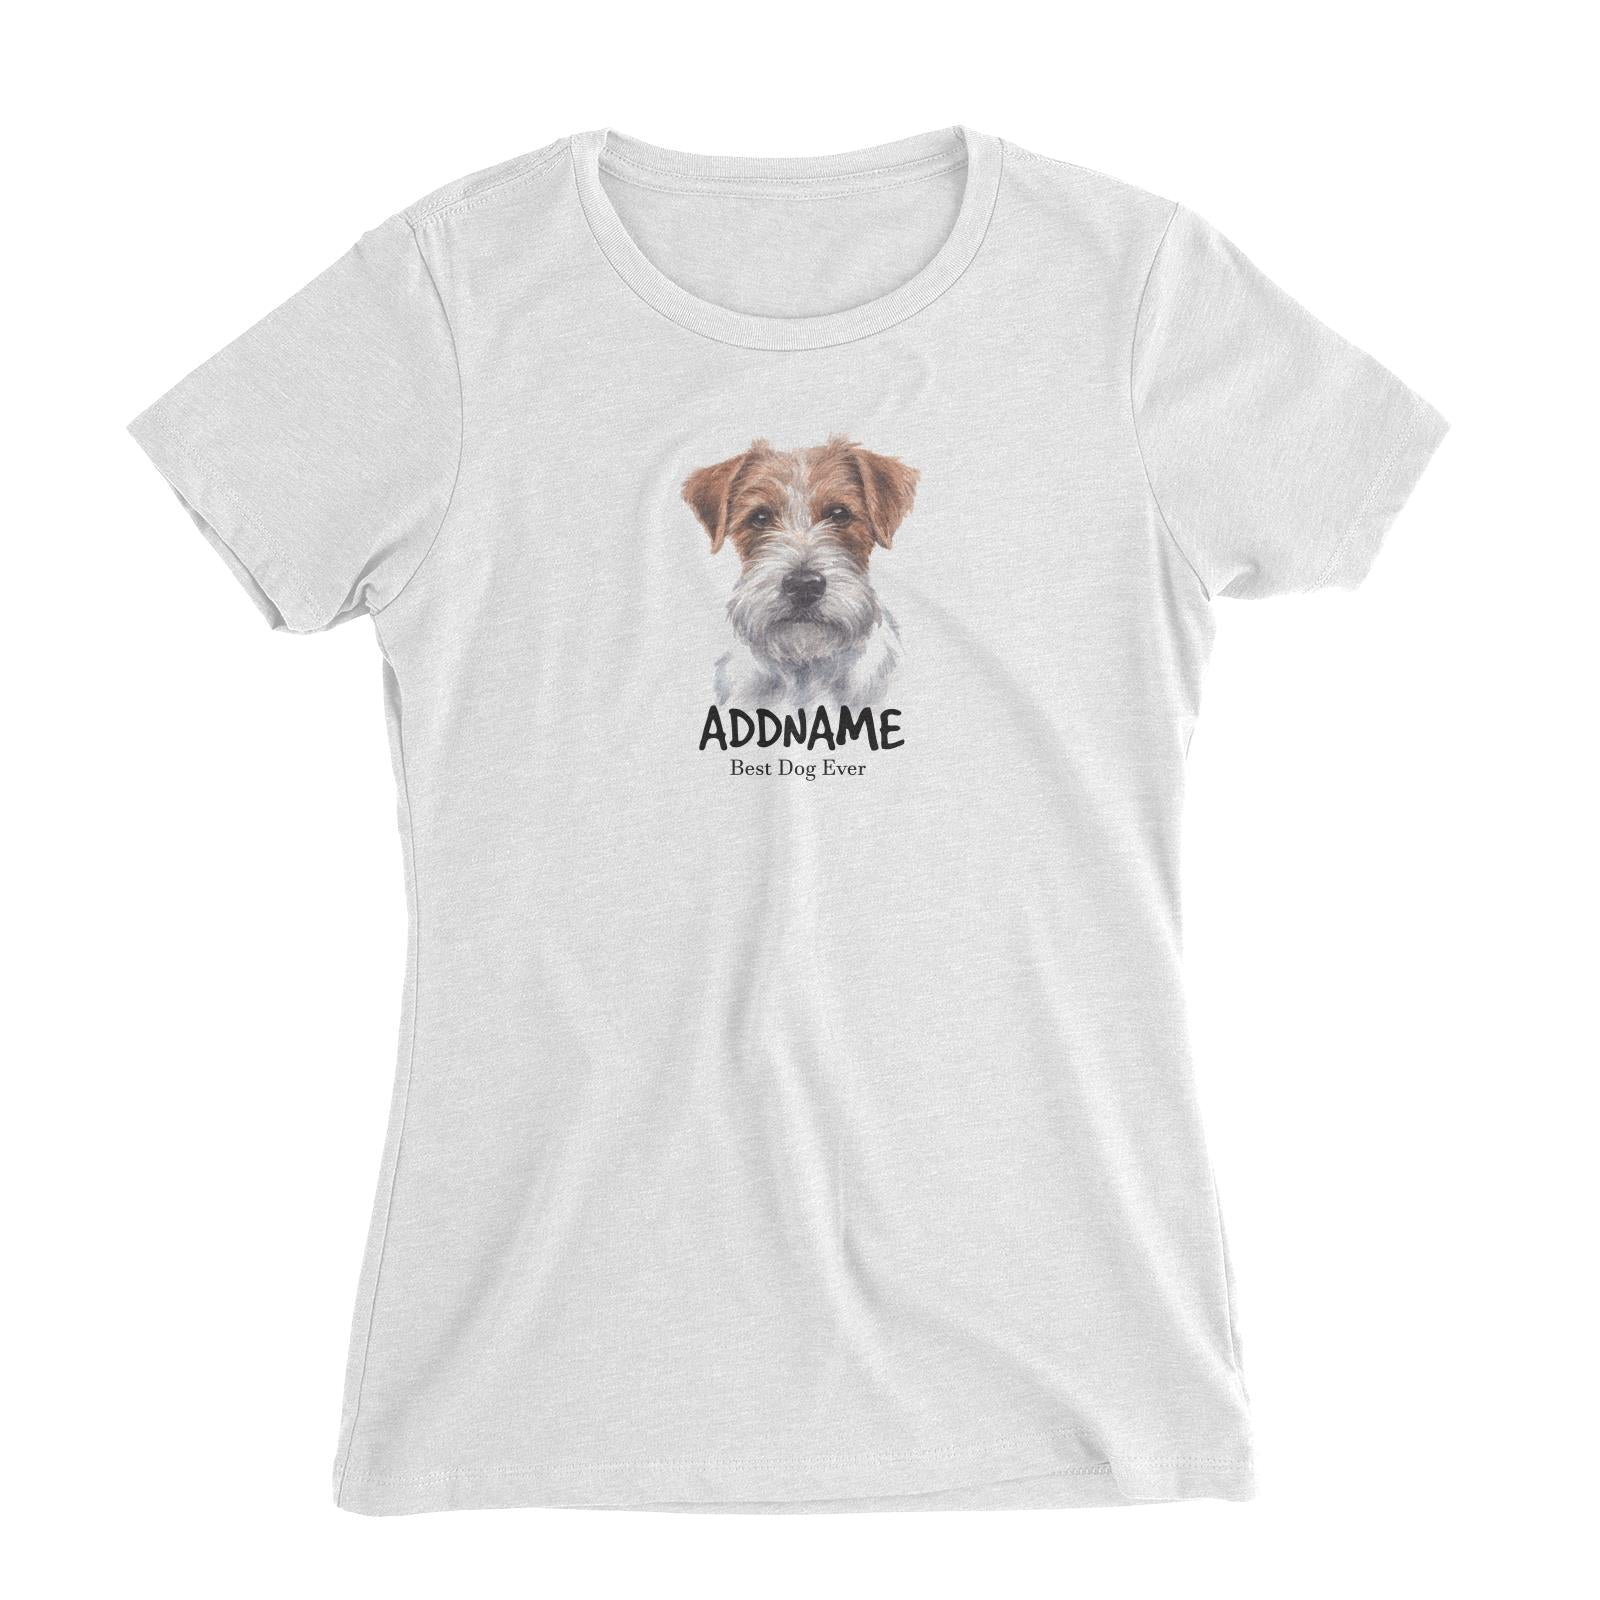 Watercolor Dog Jack Russell Hairy Best Dog Ever Addname Women's Slim Fit T-Shirt